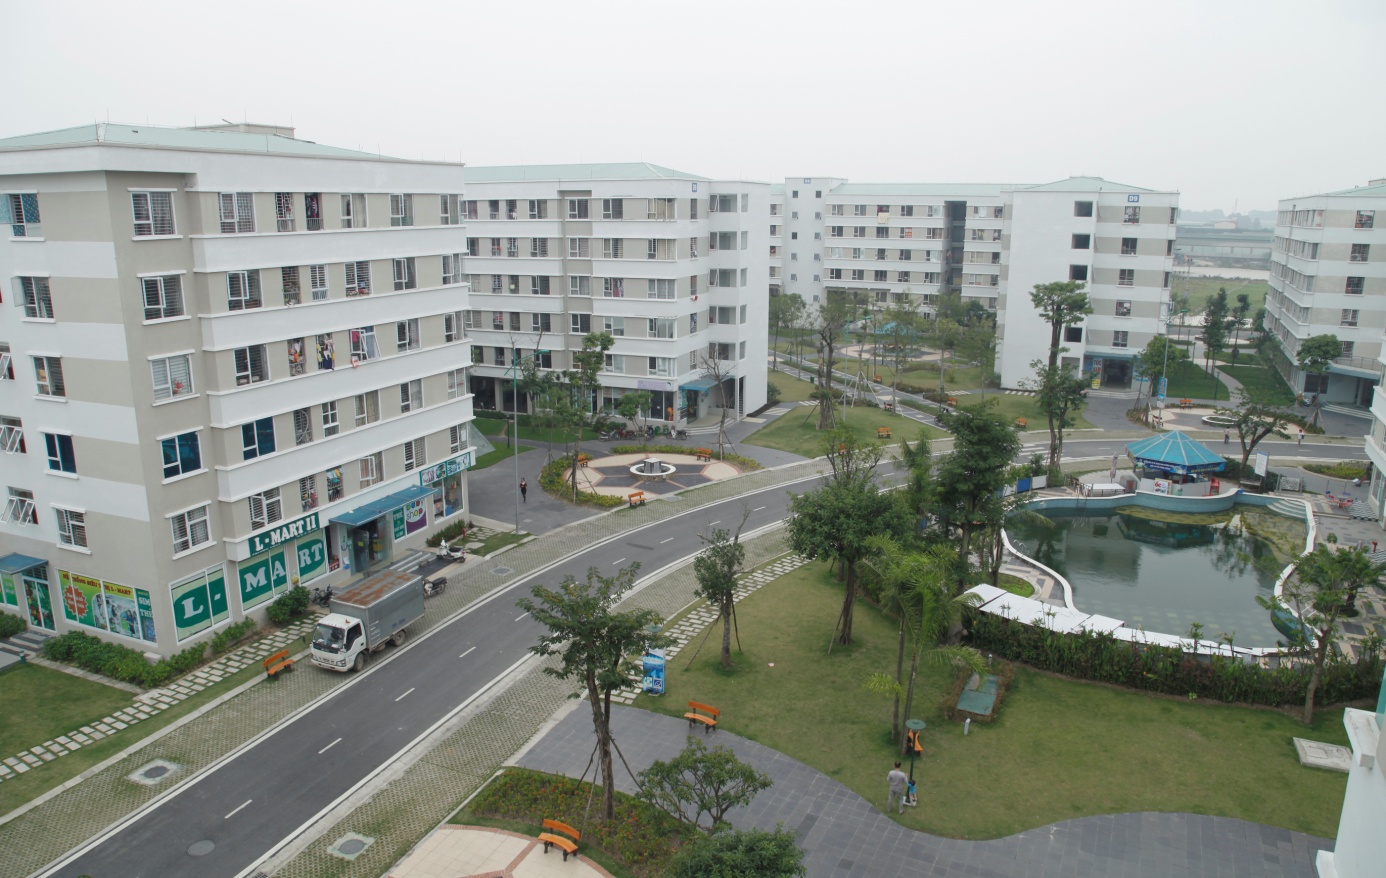 A social housing project in Gia Lam District, Hanoi.